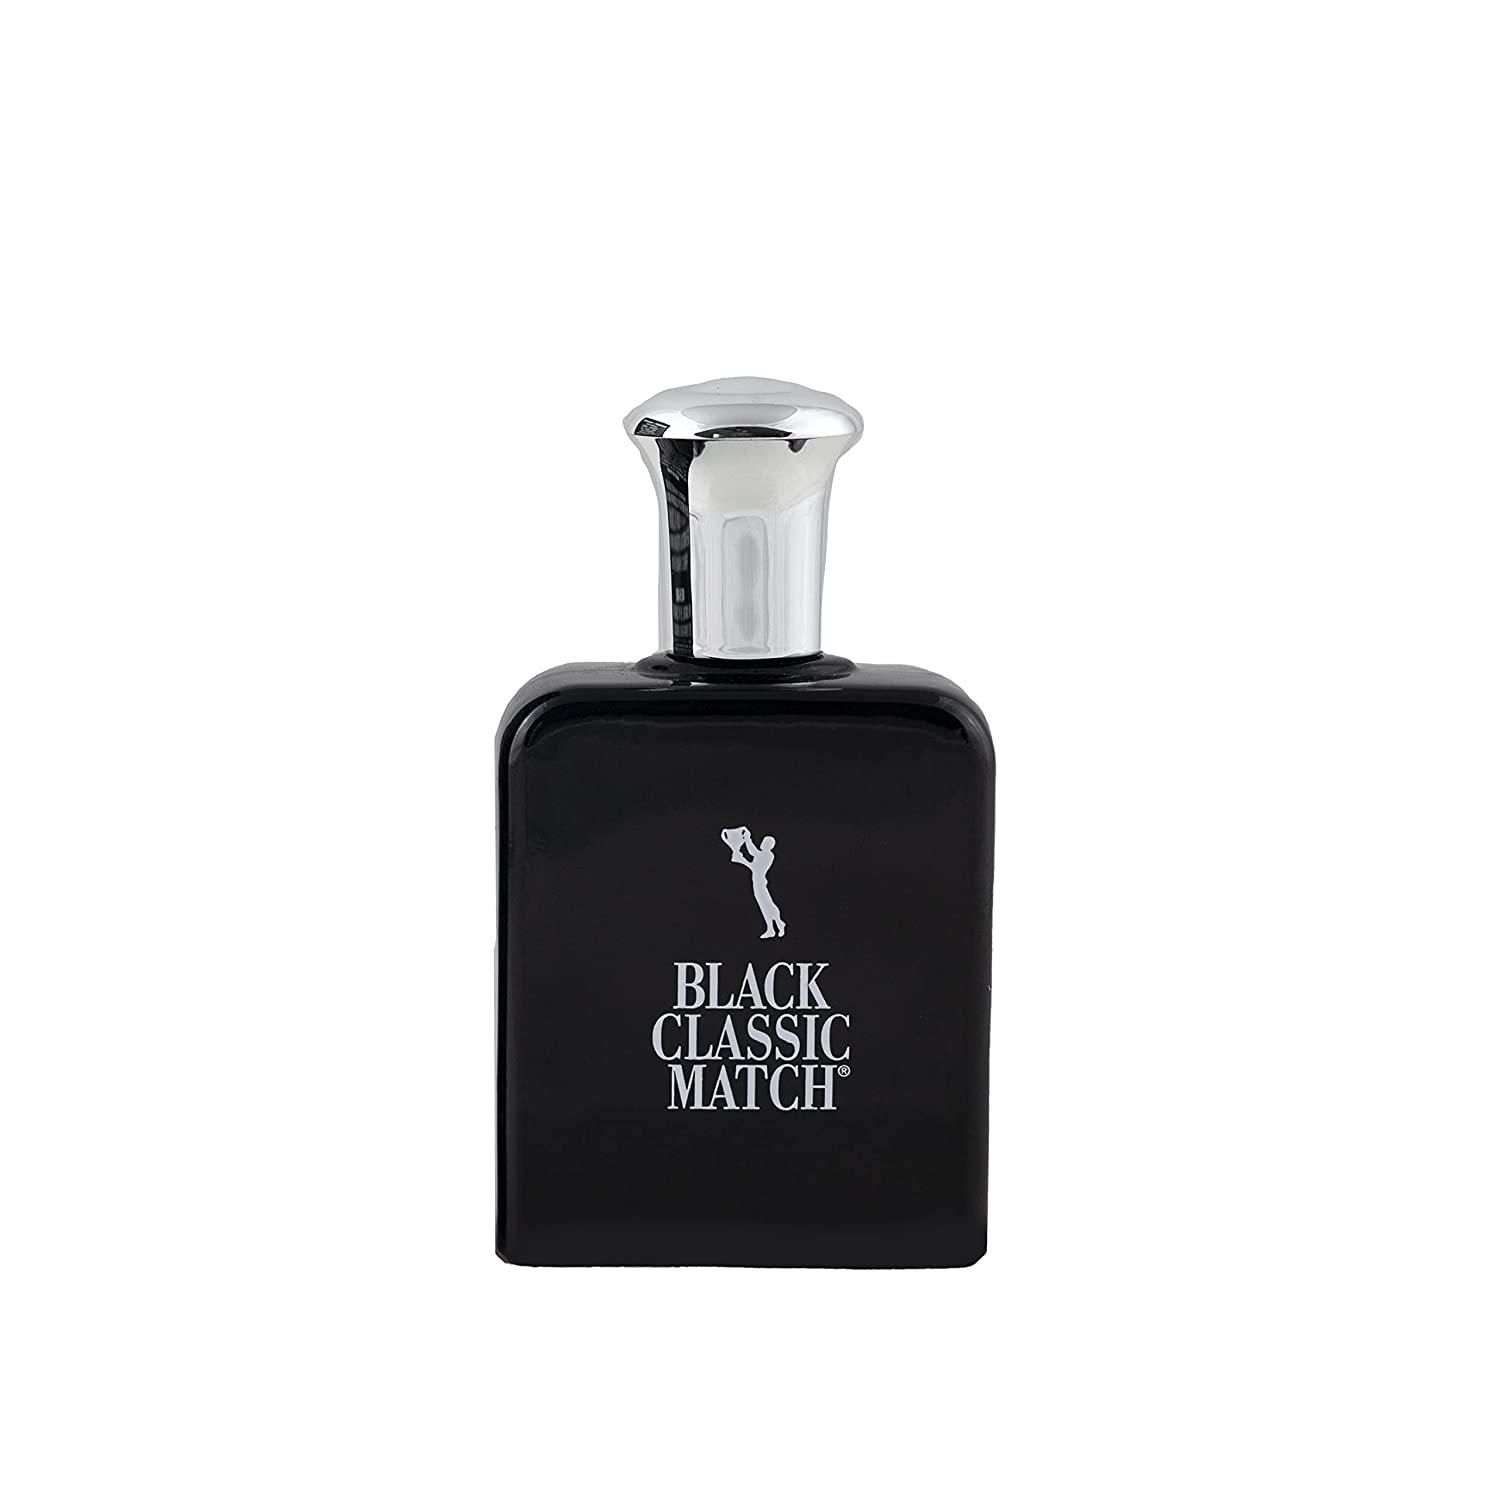 PB ParfumsBelcam Black Classic Match our Version of Polo Black EDT, 2.5 Fl  Oz, Woody